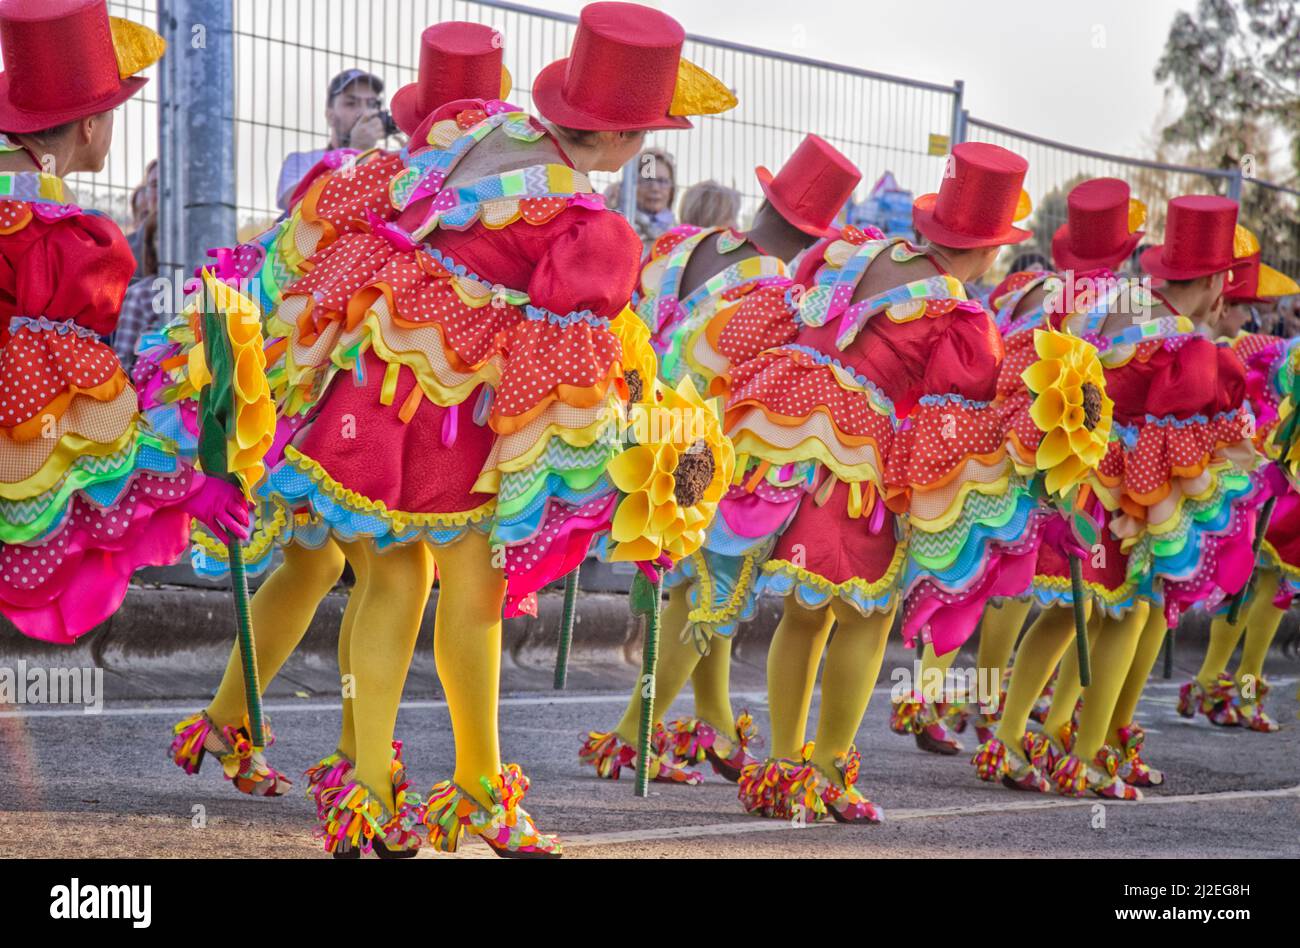 Portugal Carnaval - Women in Red Top hats and frilly dresses dancing - "An  open-air opera - Parintins Festival. Ovar, Grande Desfile or Big Parade  Stock Photo - Alamy